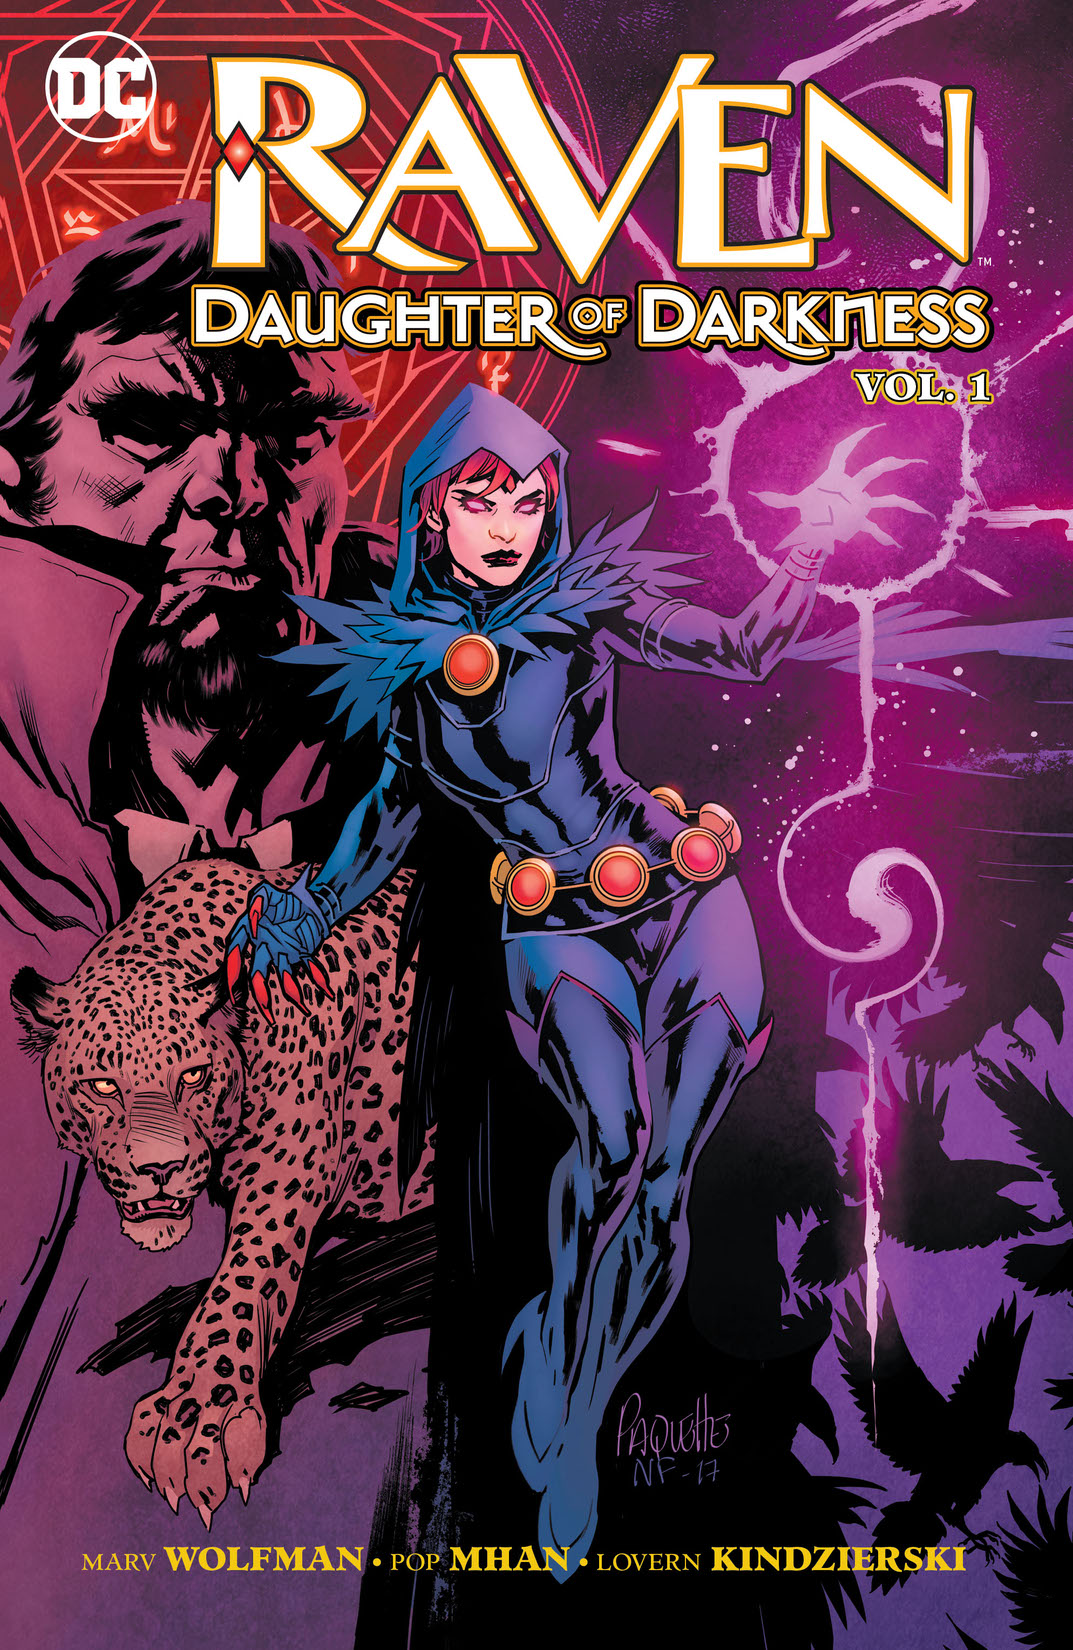 Raven: Daughter of Darkness Vol. 1 preview images